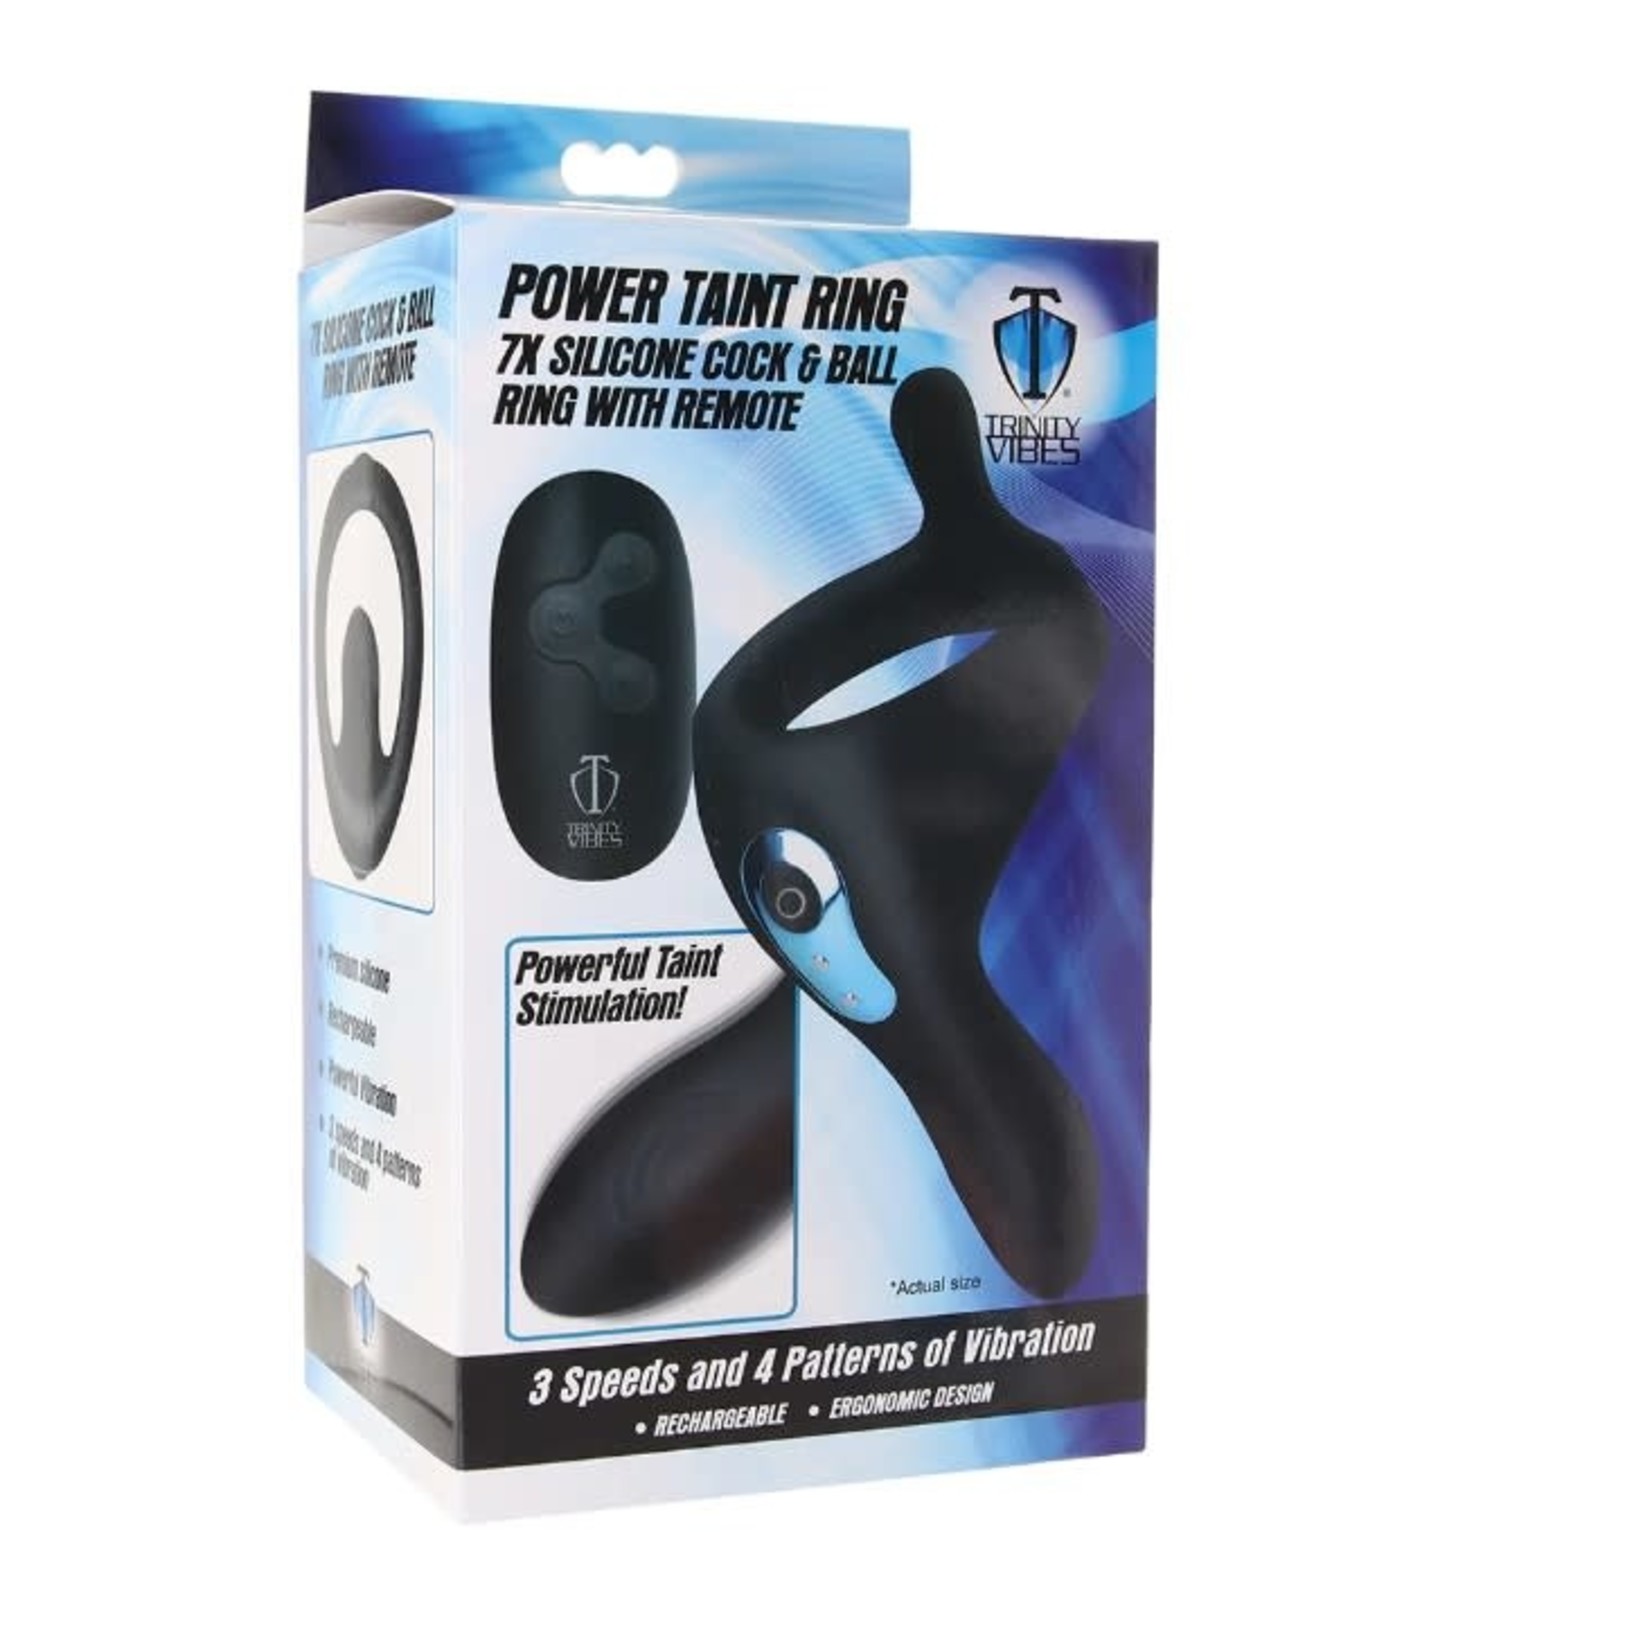 XR BRANDS TRINITY VIBES POWER TAINT REMOTE RING